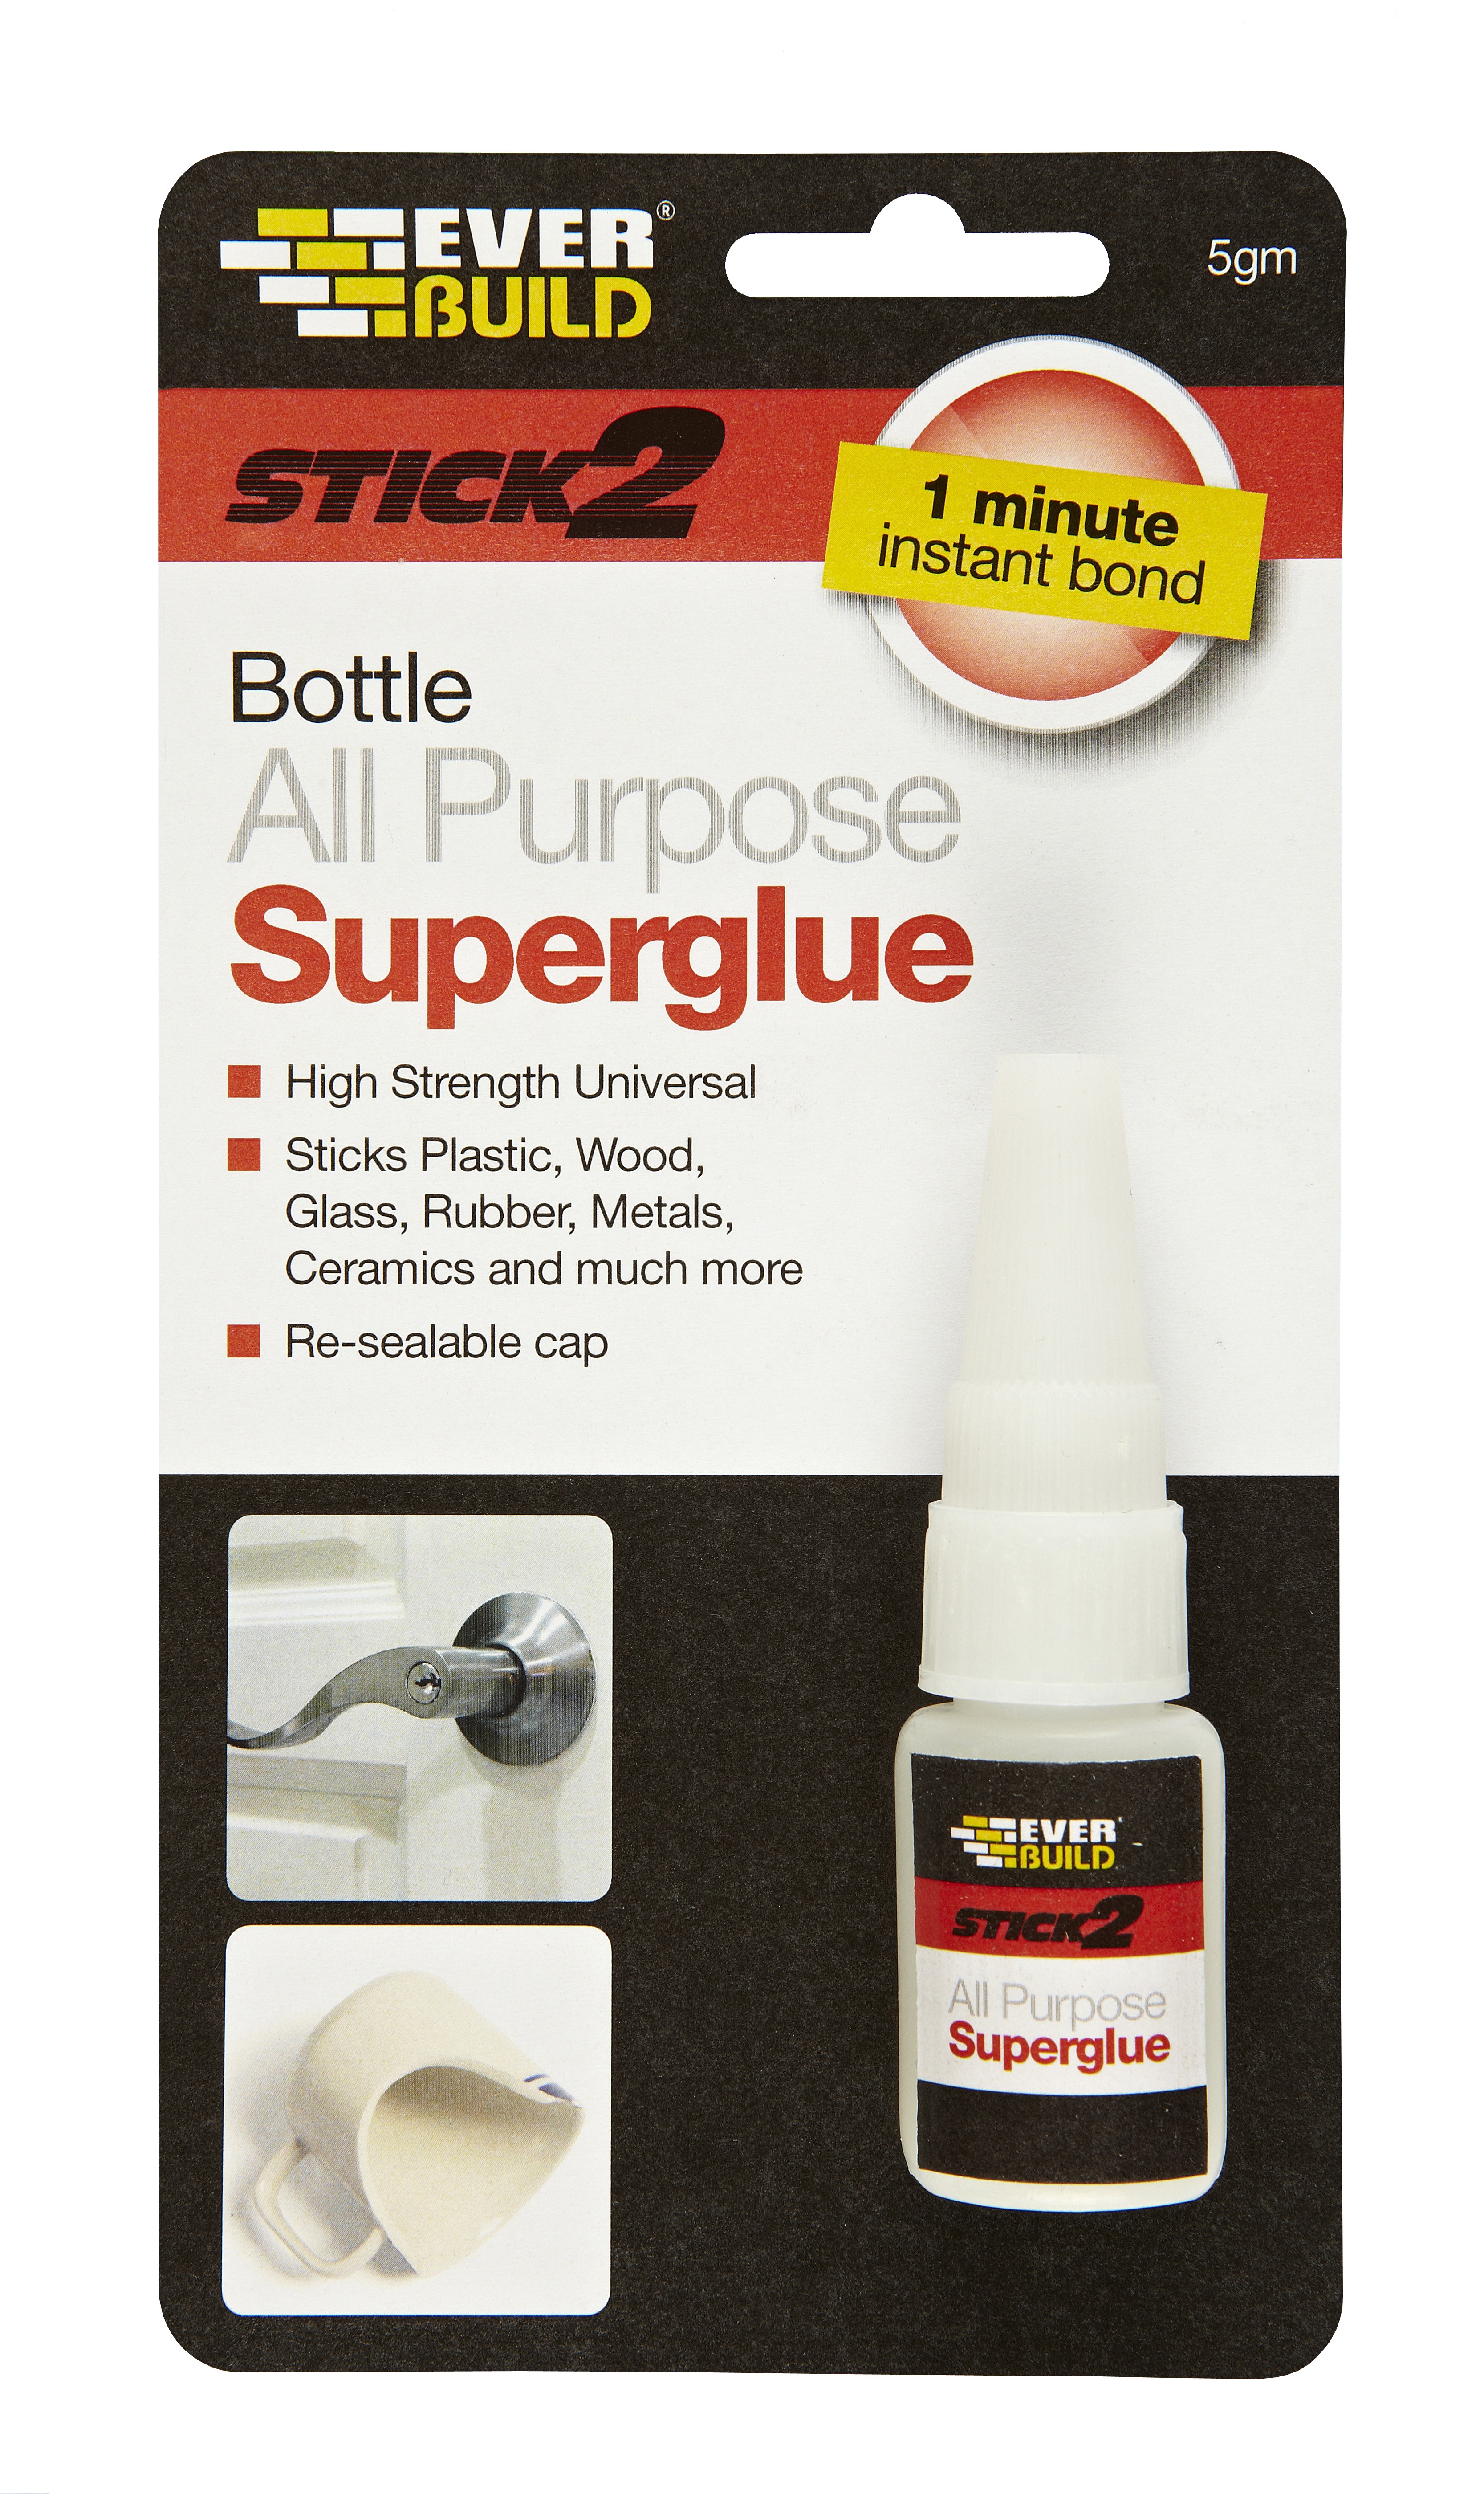 SikaEverbuild Stick2 All Purpose Superglue 5gm Clear [EVBS2SUPBOT05]